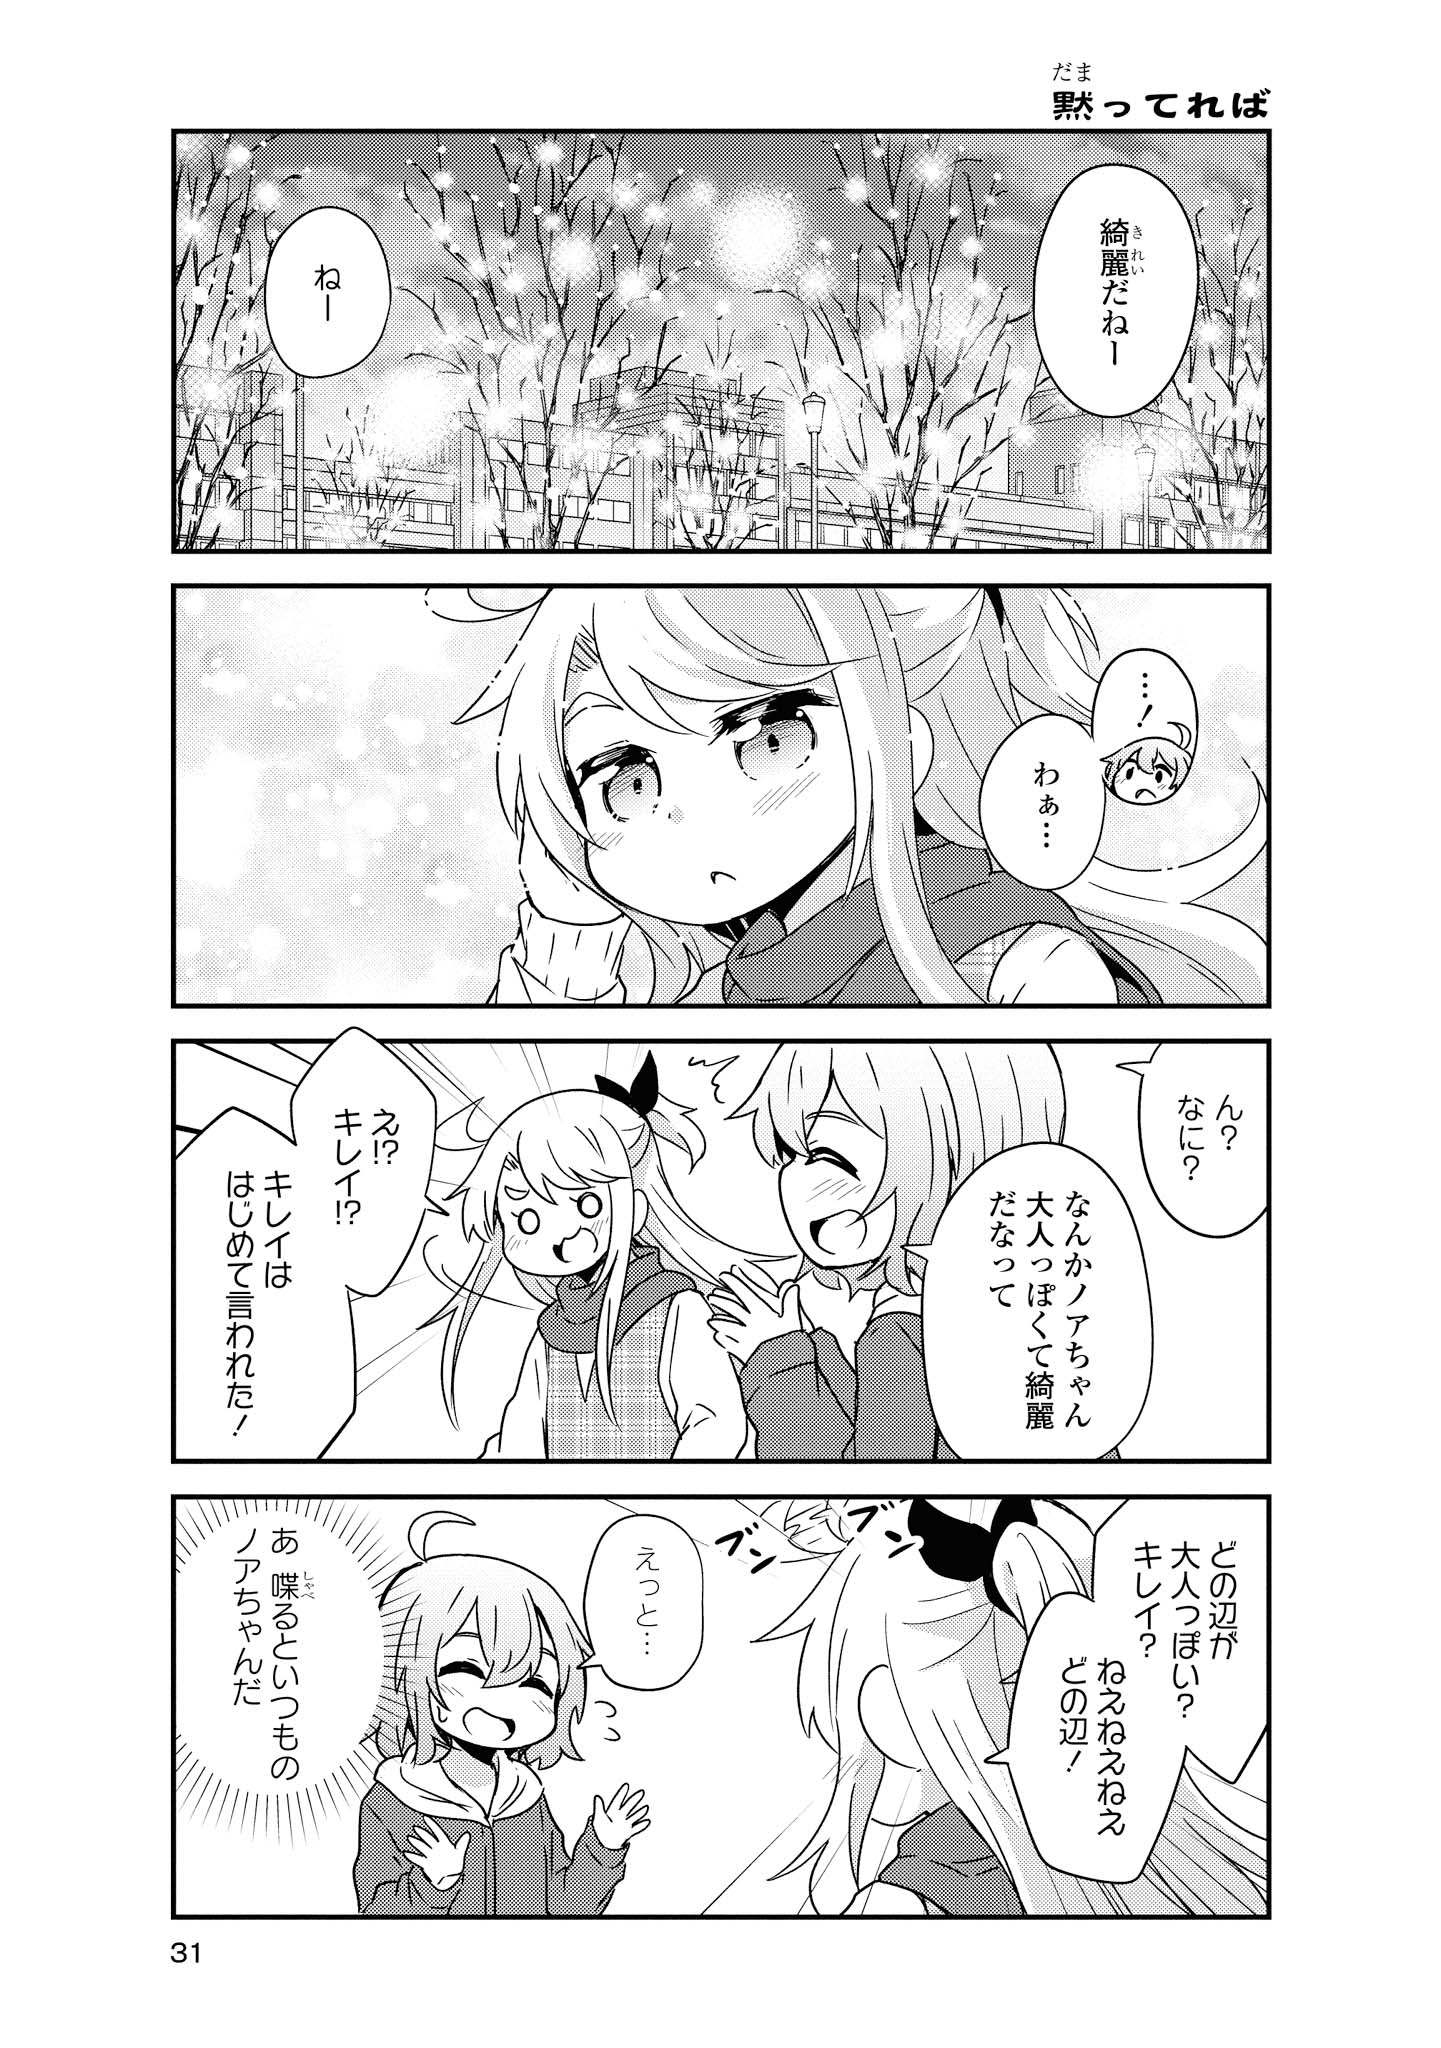 Wataten! An Angel Flew Down to Me 私に天使が舞い降りた！ 第45話 - Page 7